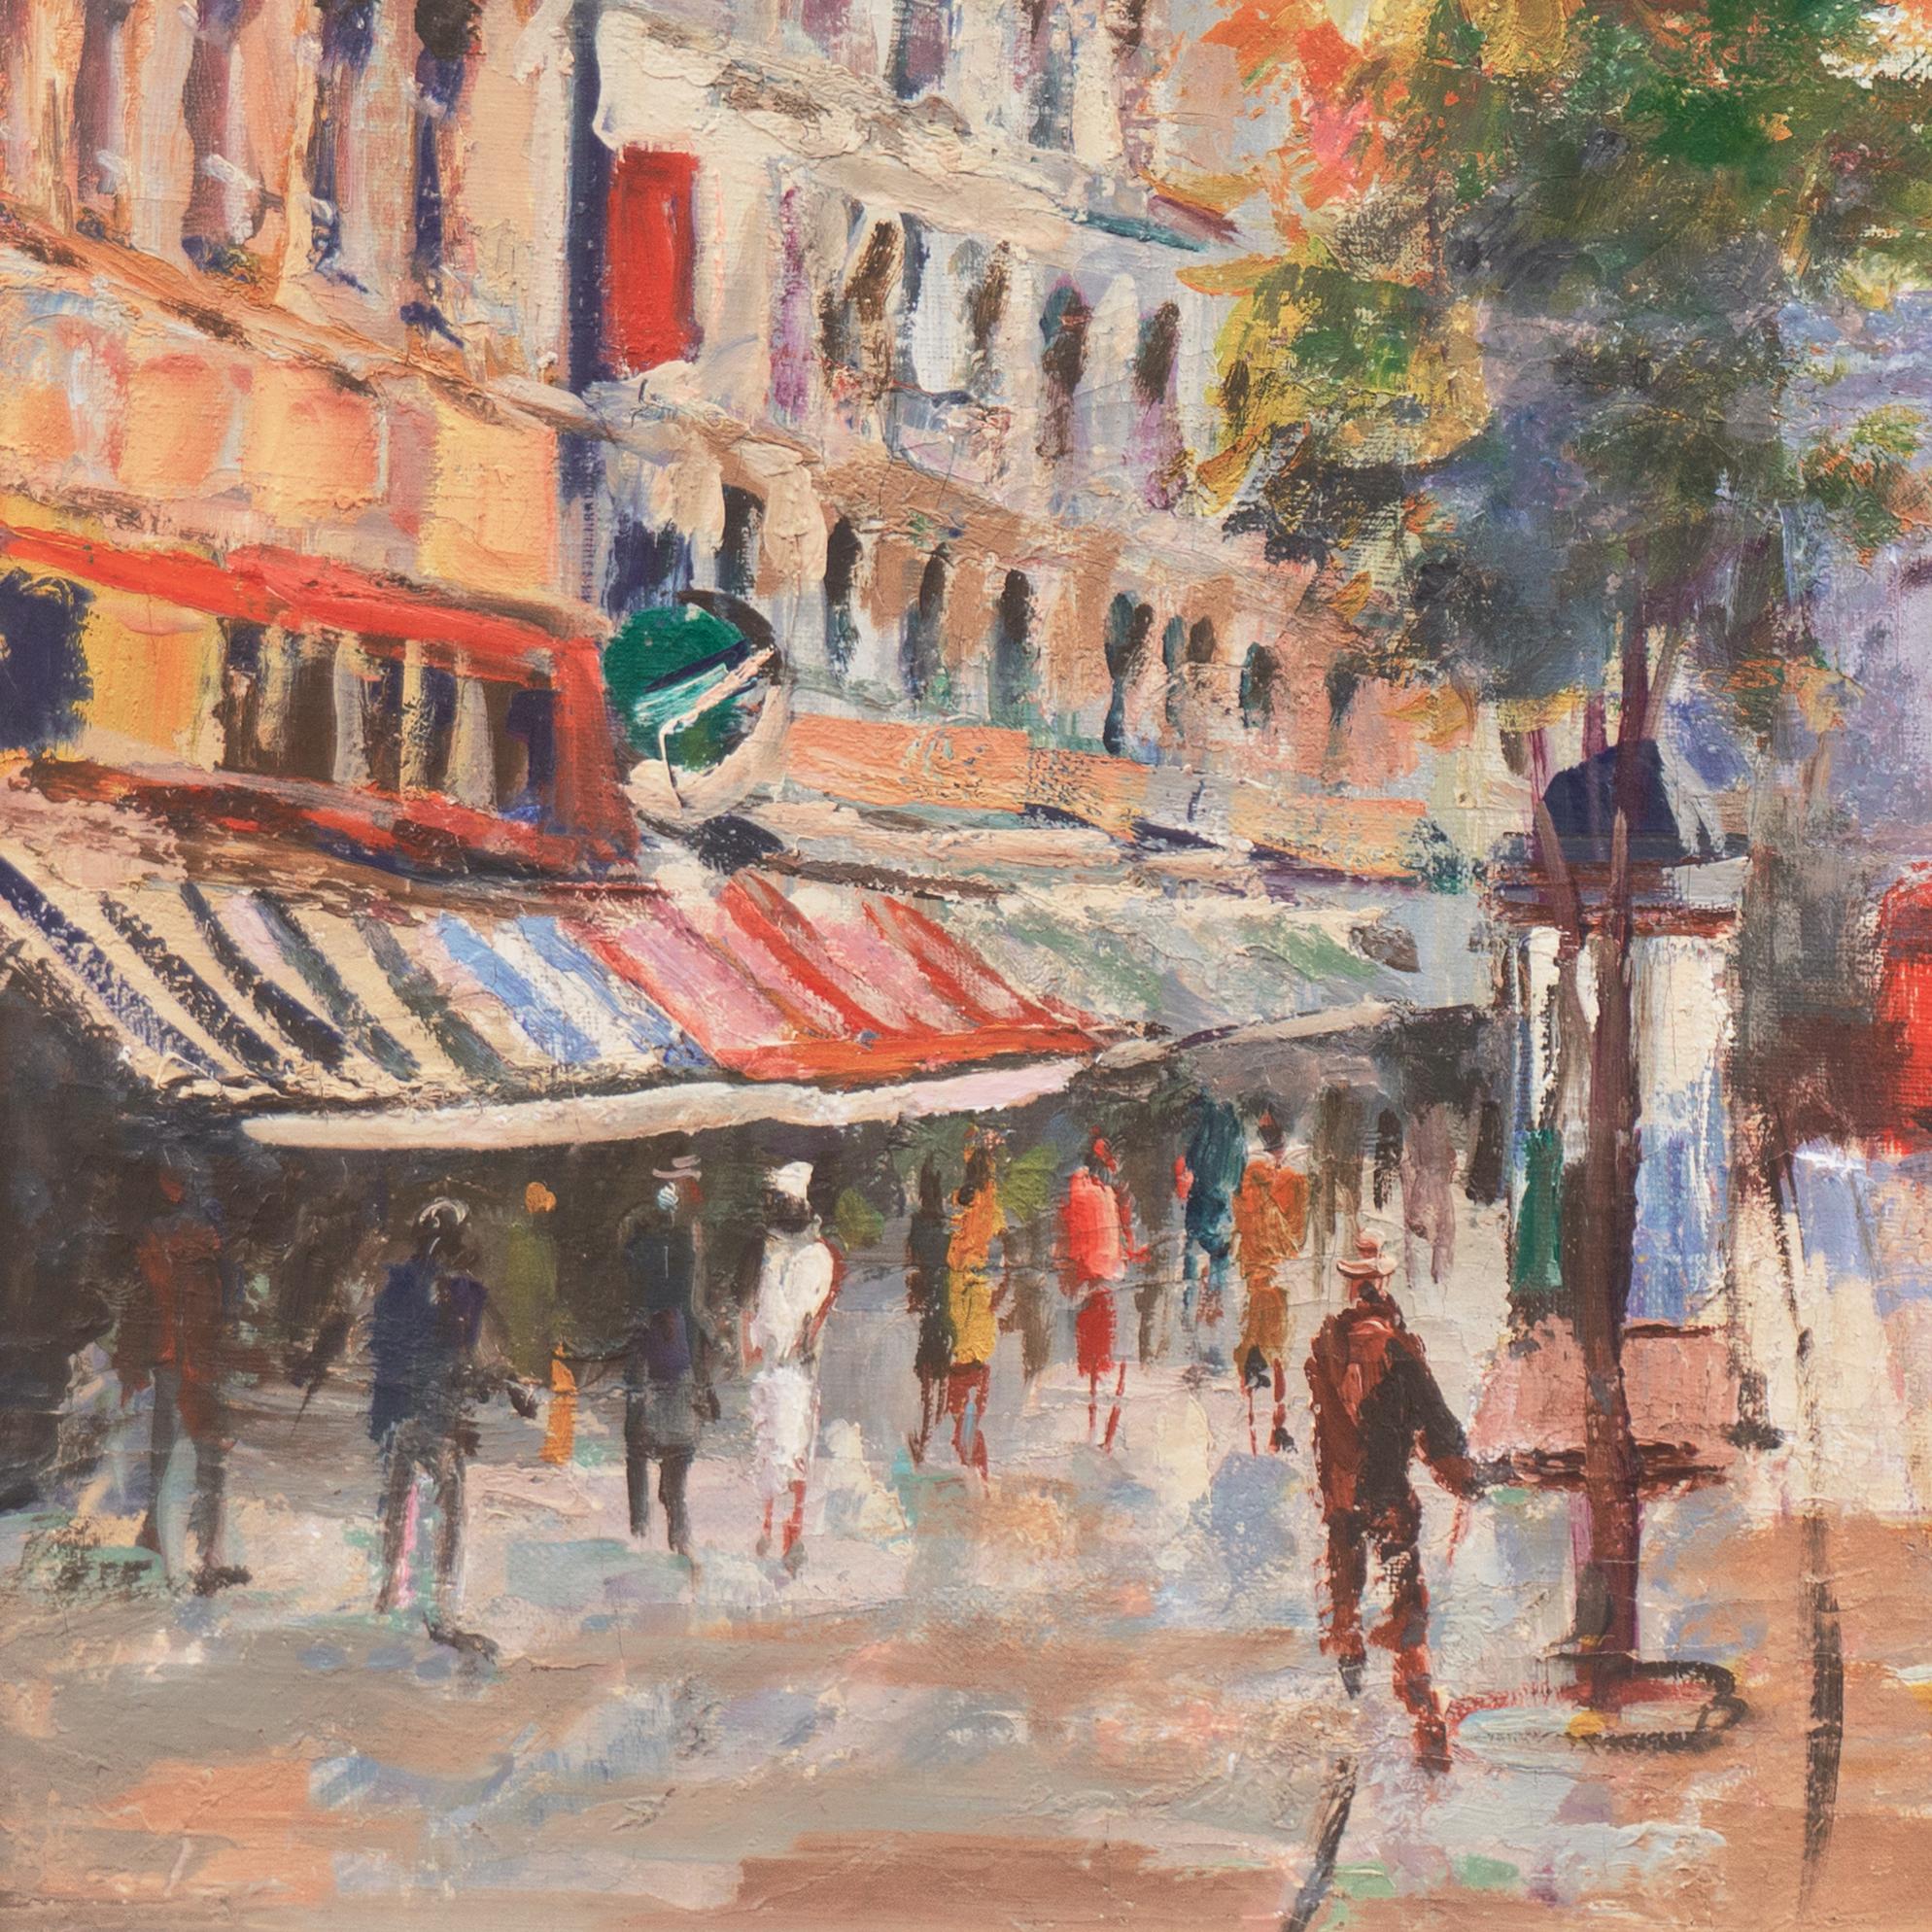 Signed lower right, 'Boucher' (French, 20th century) and painted circa 1960.

A bright and breezy, mid-century oil showing numerous shoppers and pedestrians outside the fashionable shops and cafes of the Champs-Élysées with a view towards the the